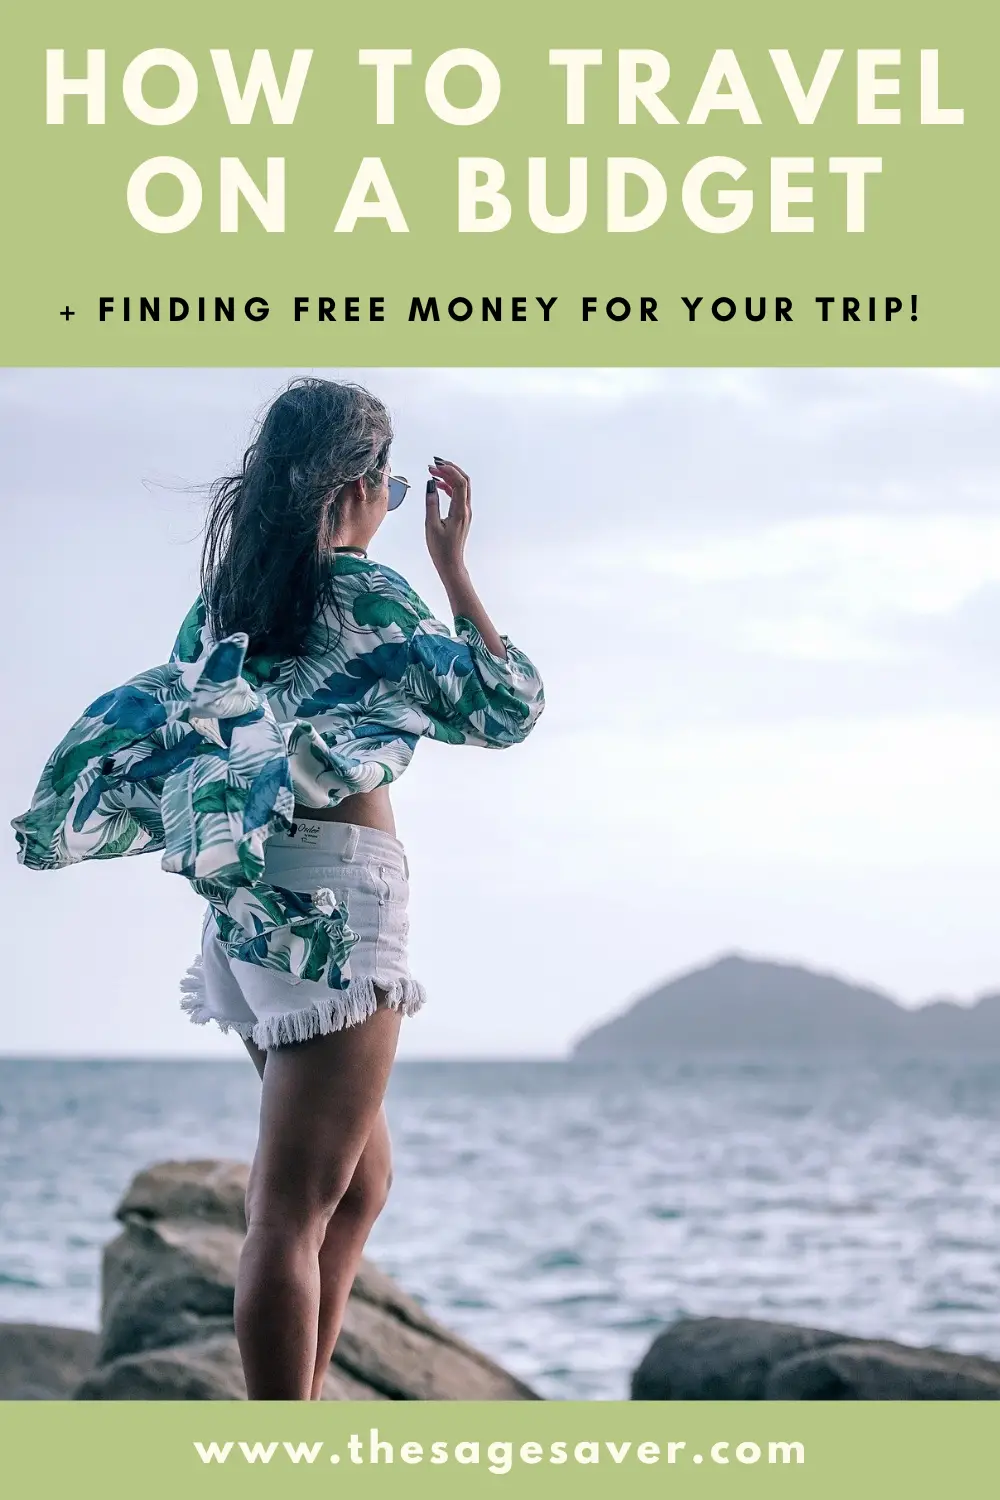 How to Travel on a Budget: Our Best 11 Tips